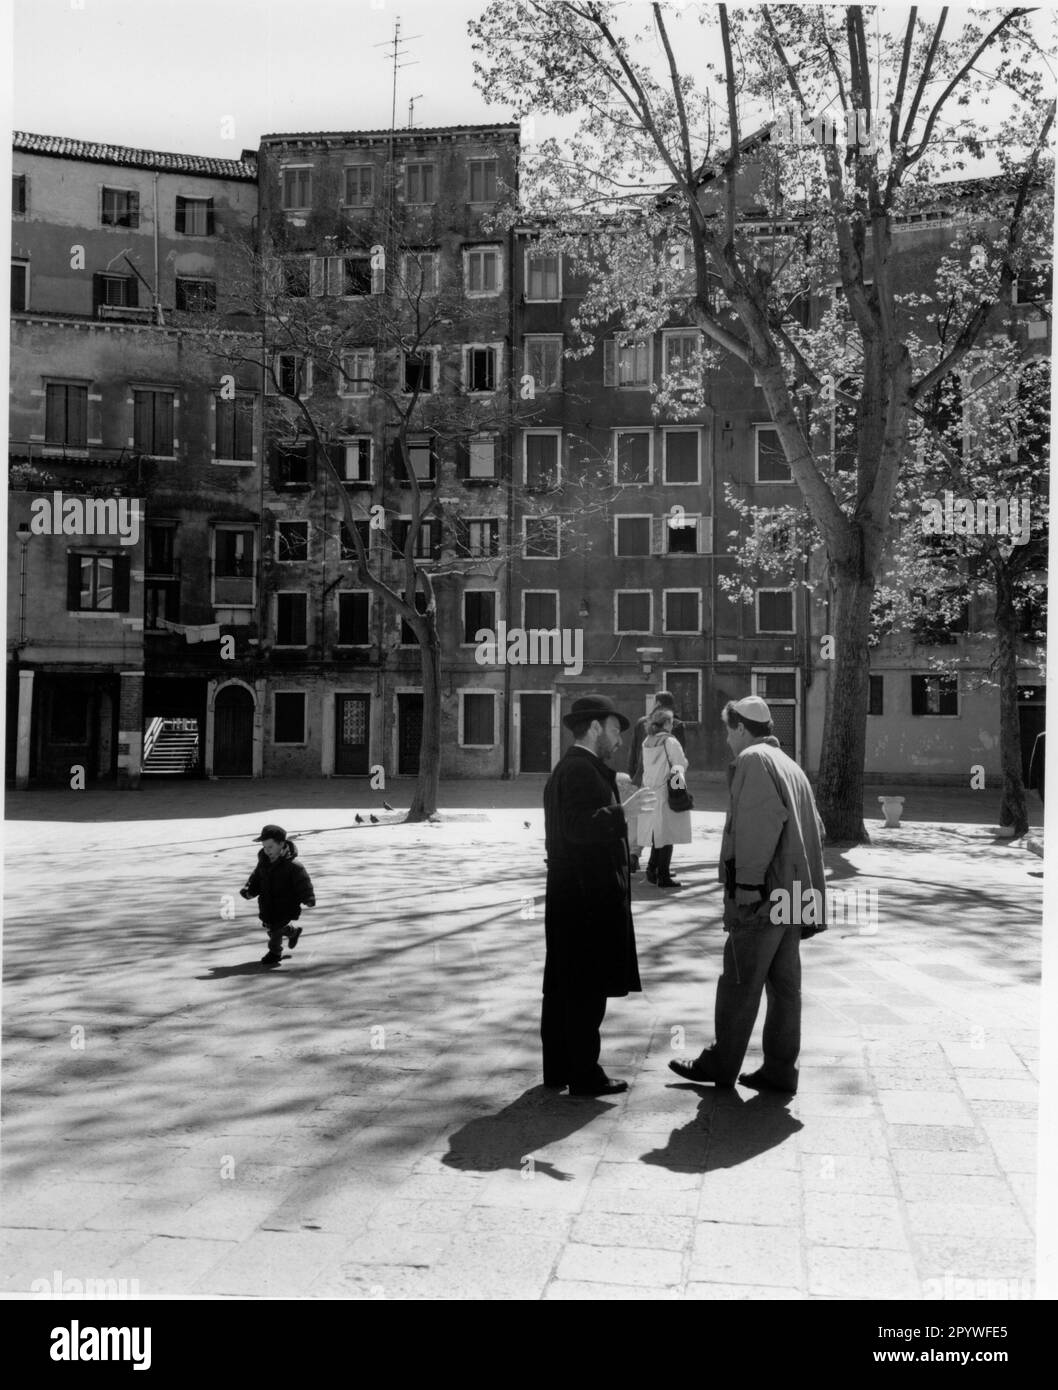 Venice, Venezia (Italy), Ghetto (established in 1516 by decision of the Venezuelan government, Jewish quarter): Campo del Ghetto Nuovo. View of the square with the eight-story residential buildings due to lack of space. Street scene, black and white. Photo, 1997. Stock Photo